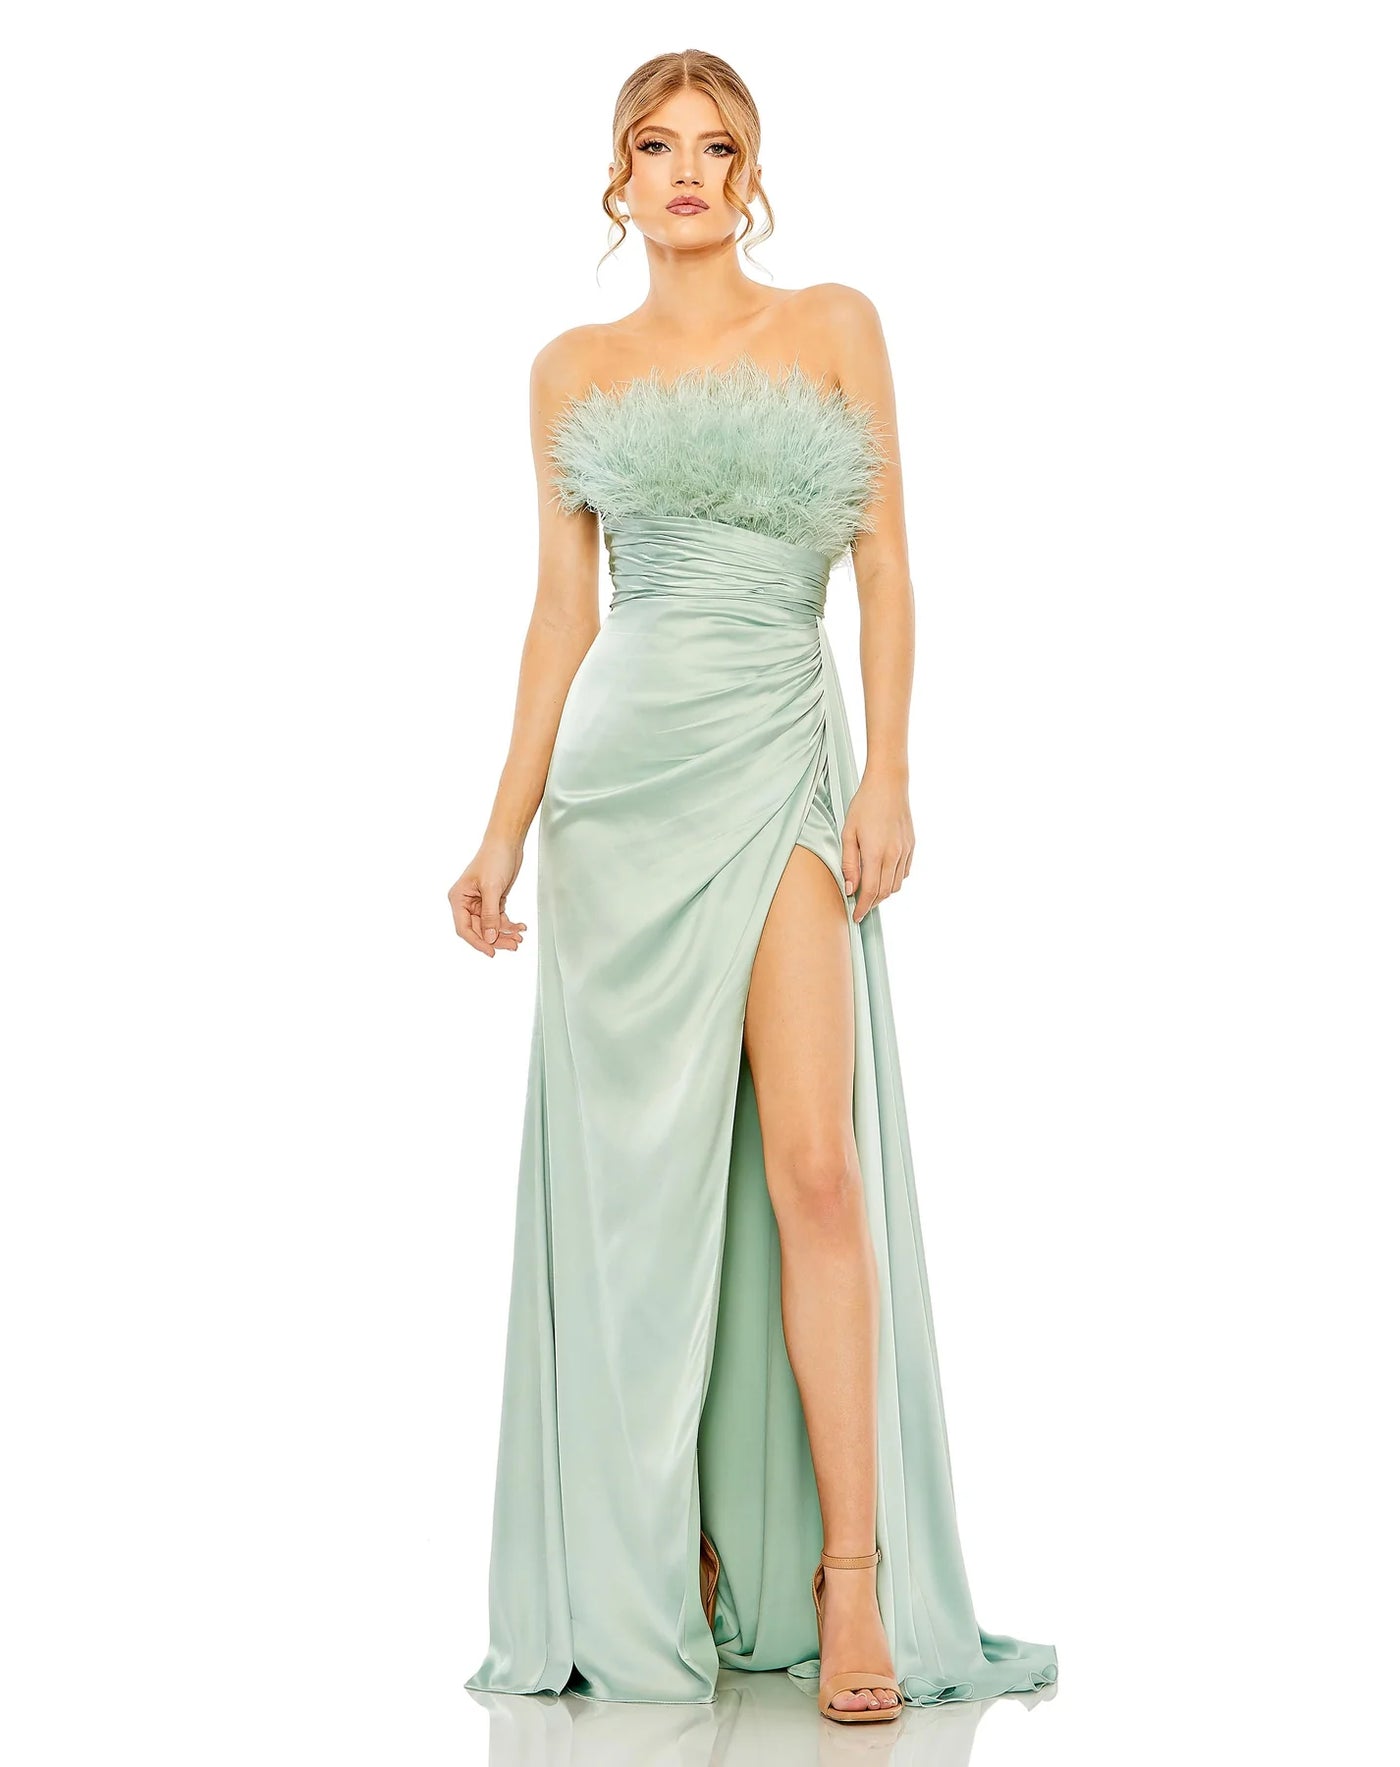 Mac Duggal 11690 Strapless Feather Detail Satin Gown B Chic Fashions Long Dress Evening Gowns